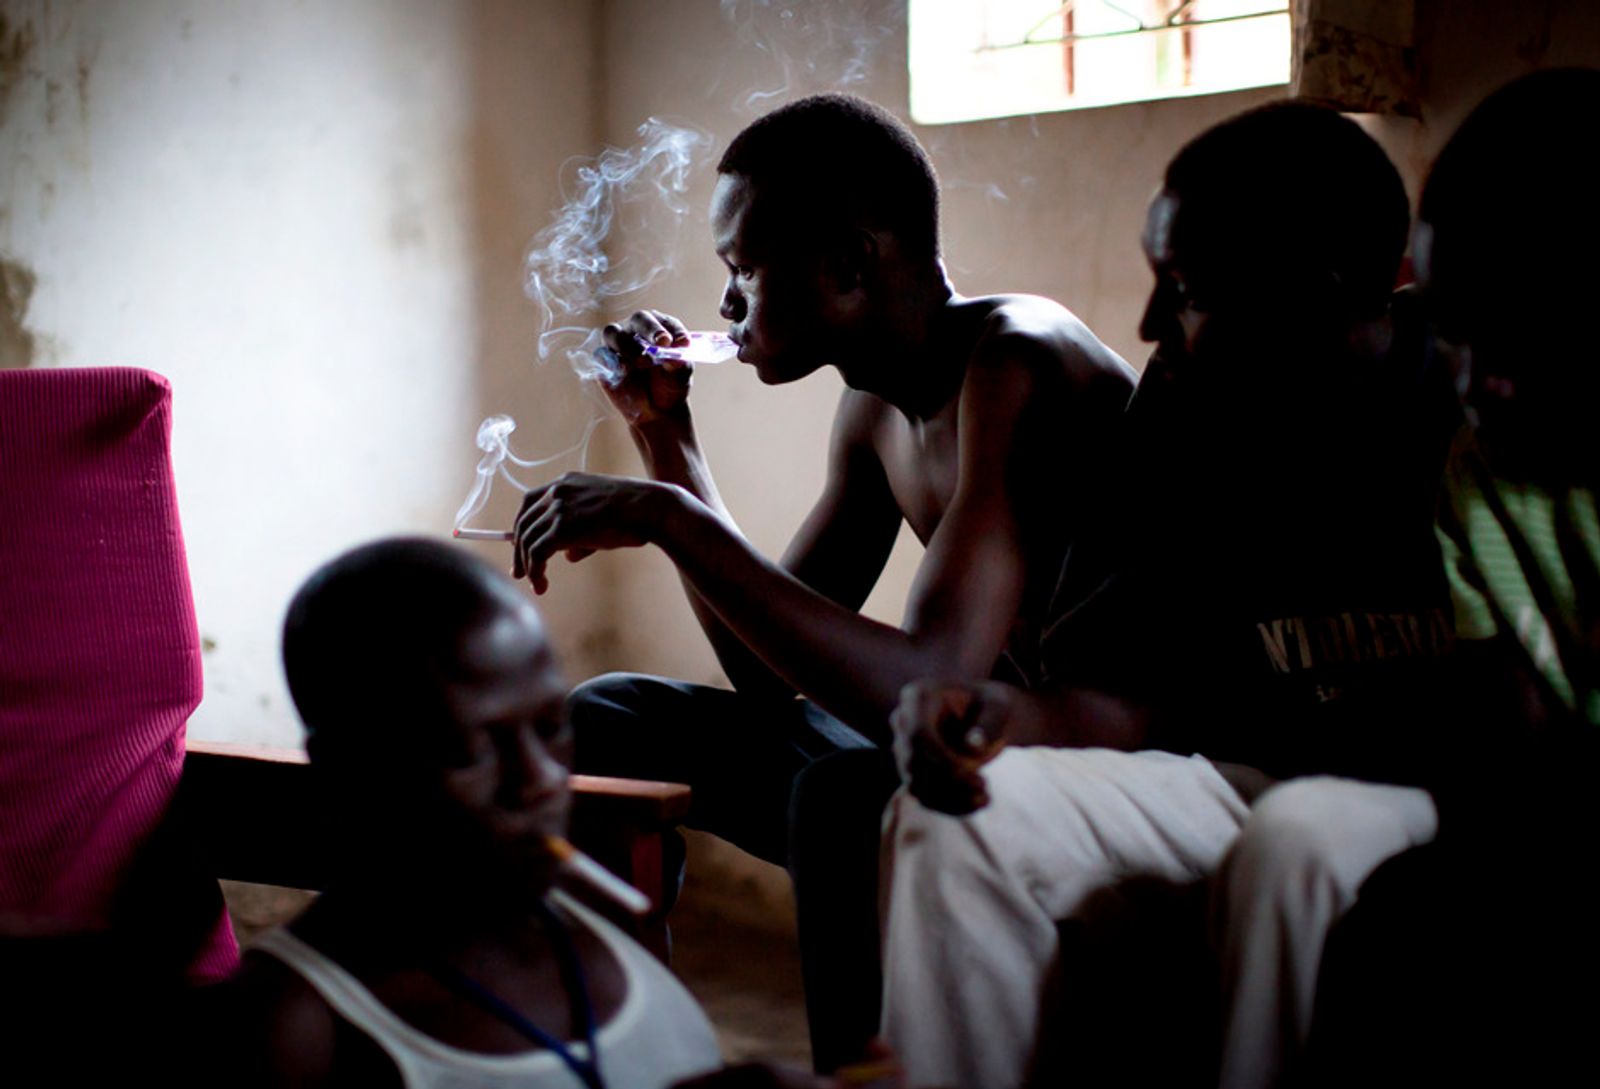 © Anne Ackermann - Image from the Gulu Youth photography project